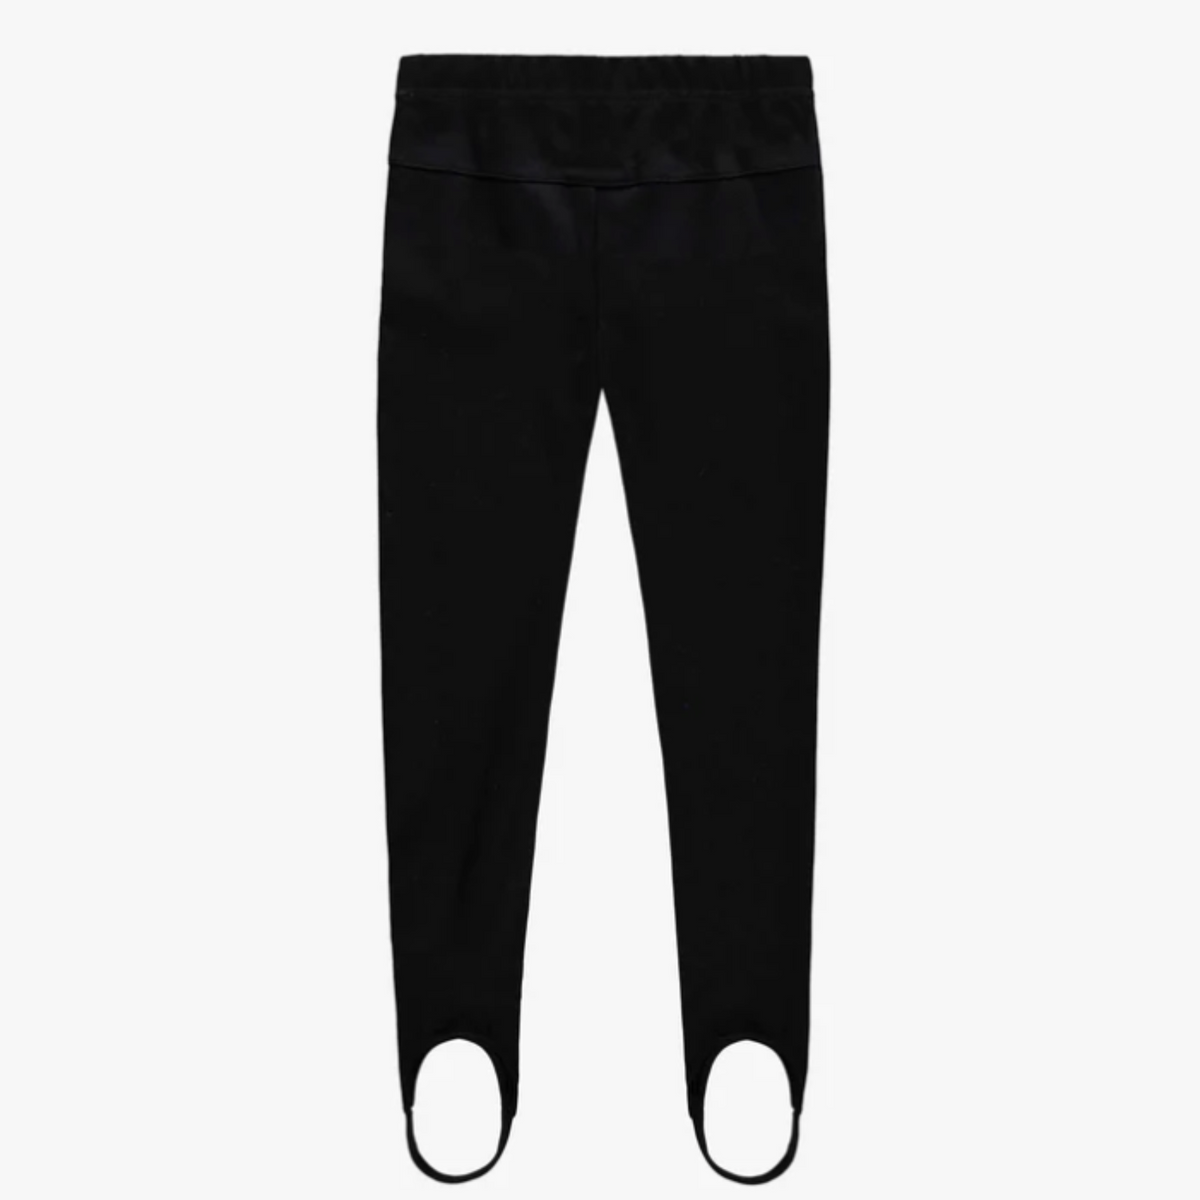 Charcoal Stirrup Pants With Foot Clips in Ponte De Roma, Child